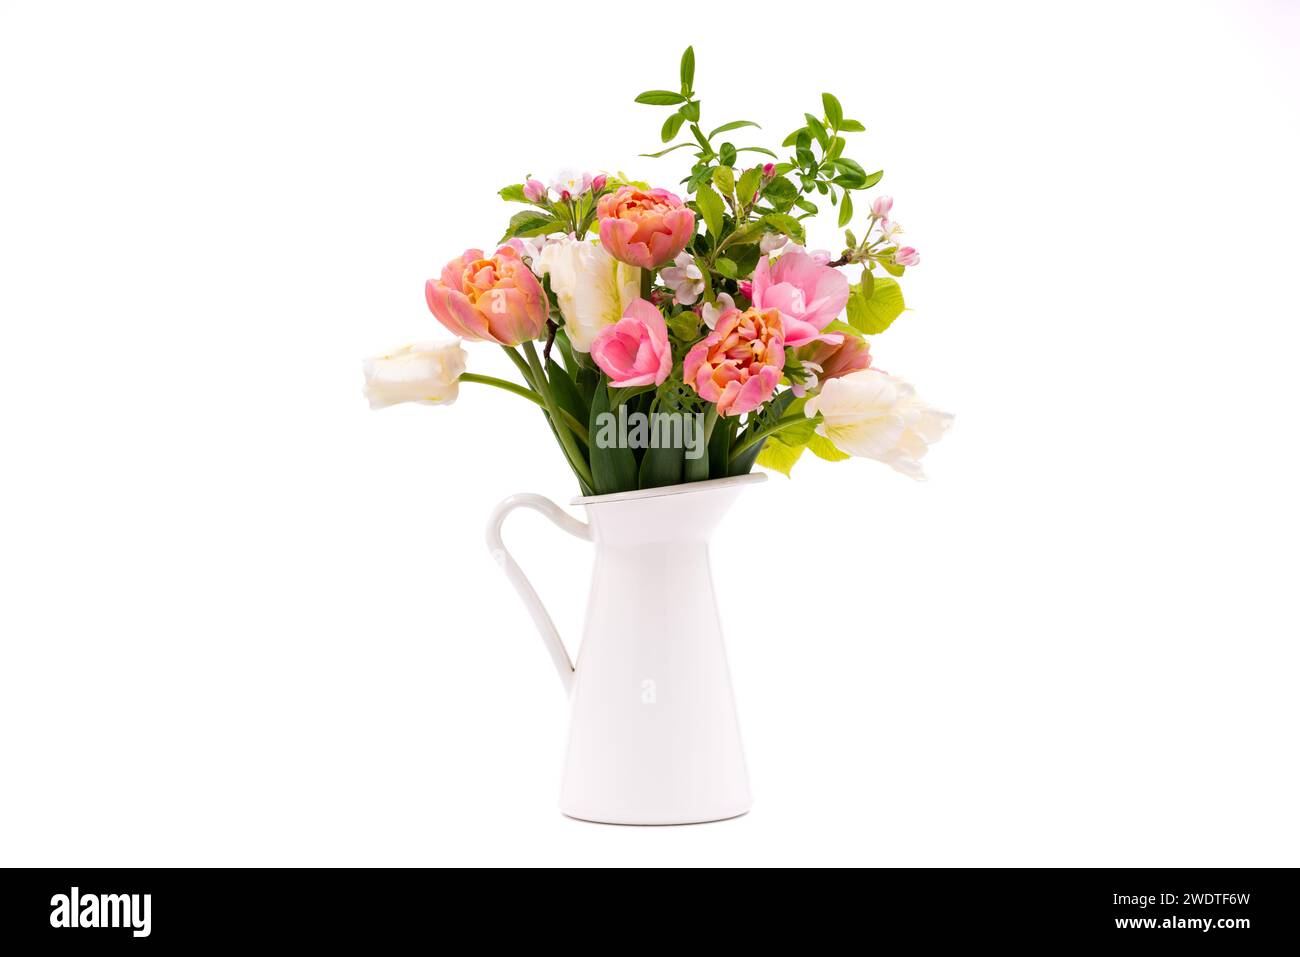 Elegant mixed pastel colored spring bouquet in white vase on white background. Spring flowers. Tulips bouquet. Stock Photo